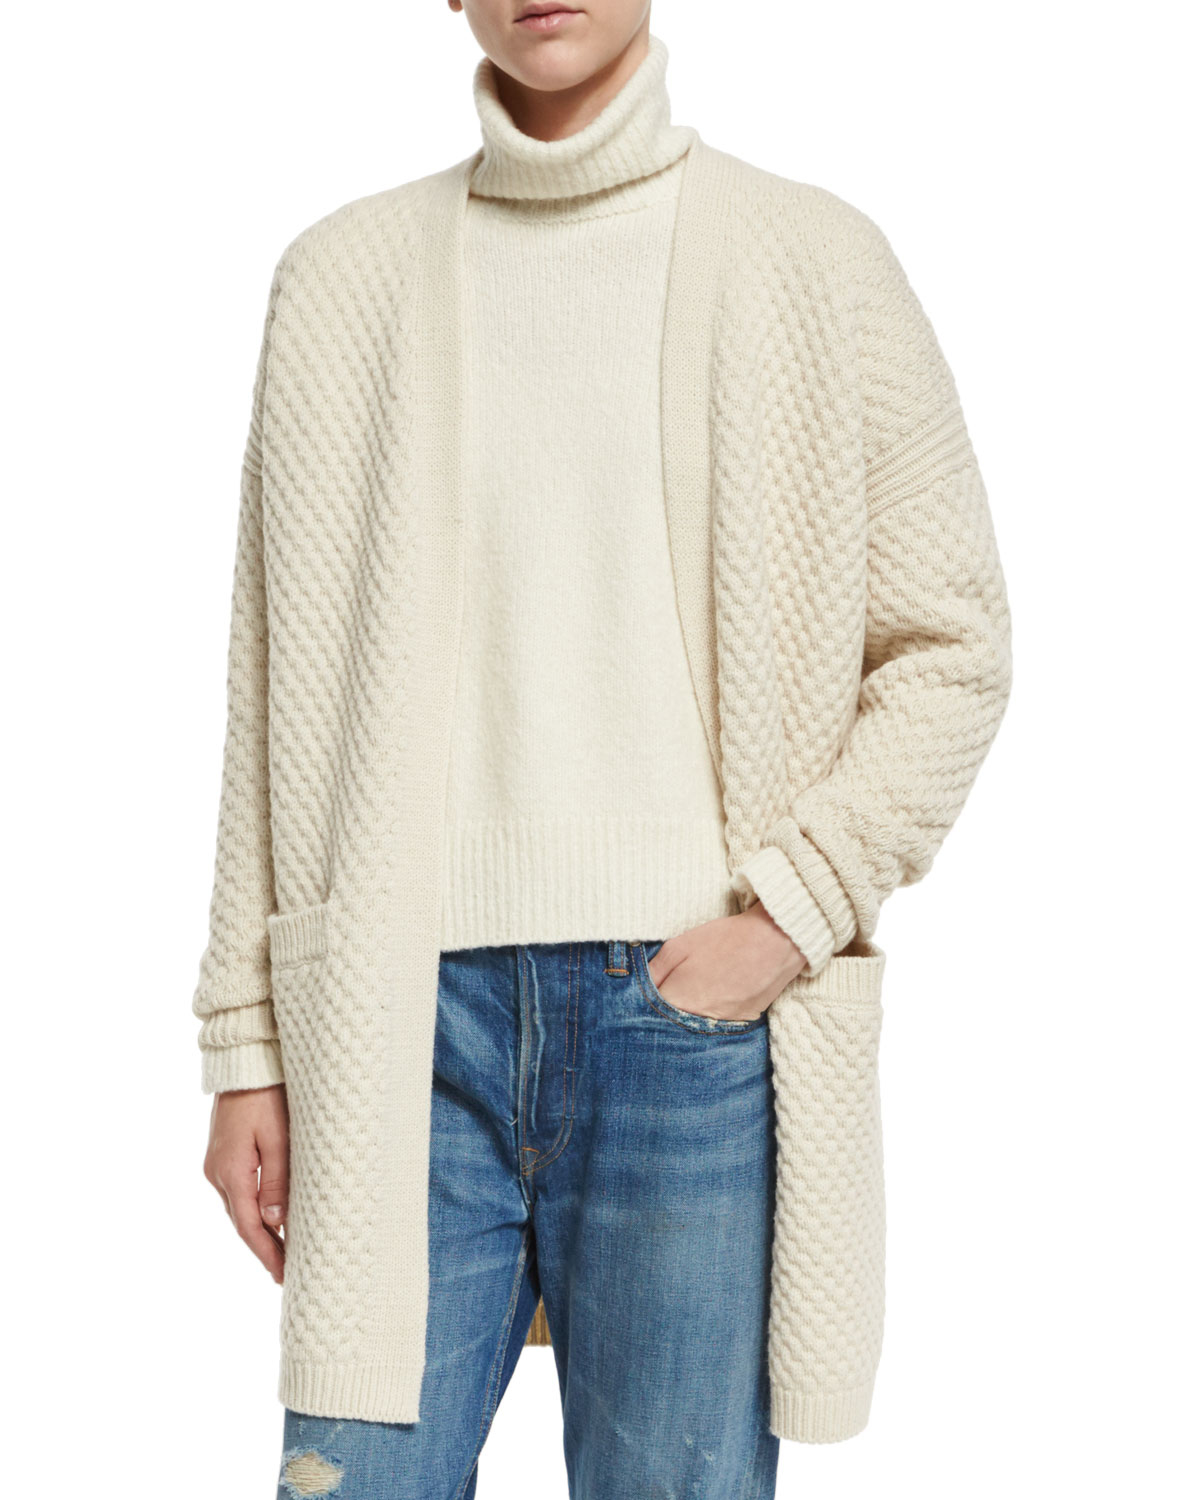 Lyst Vince  Honeycomb knit Long Cardigan  in White